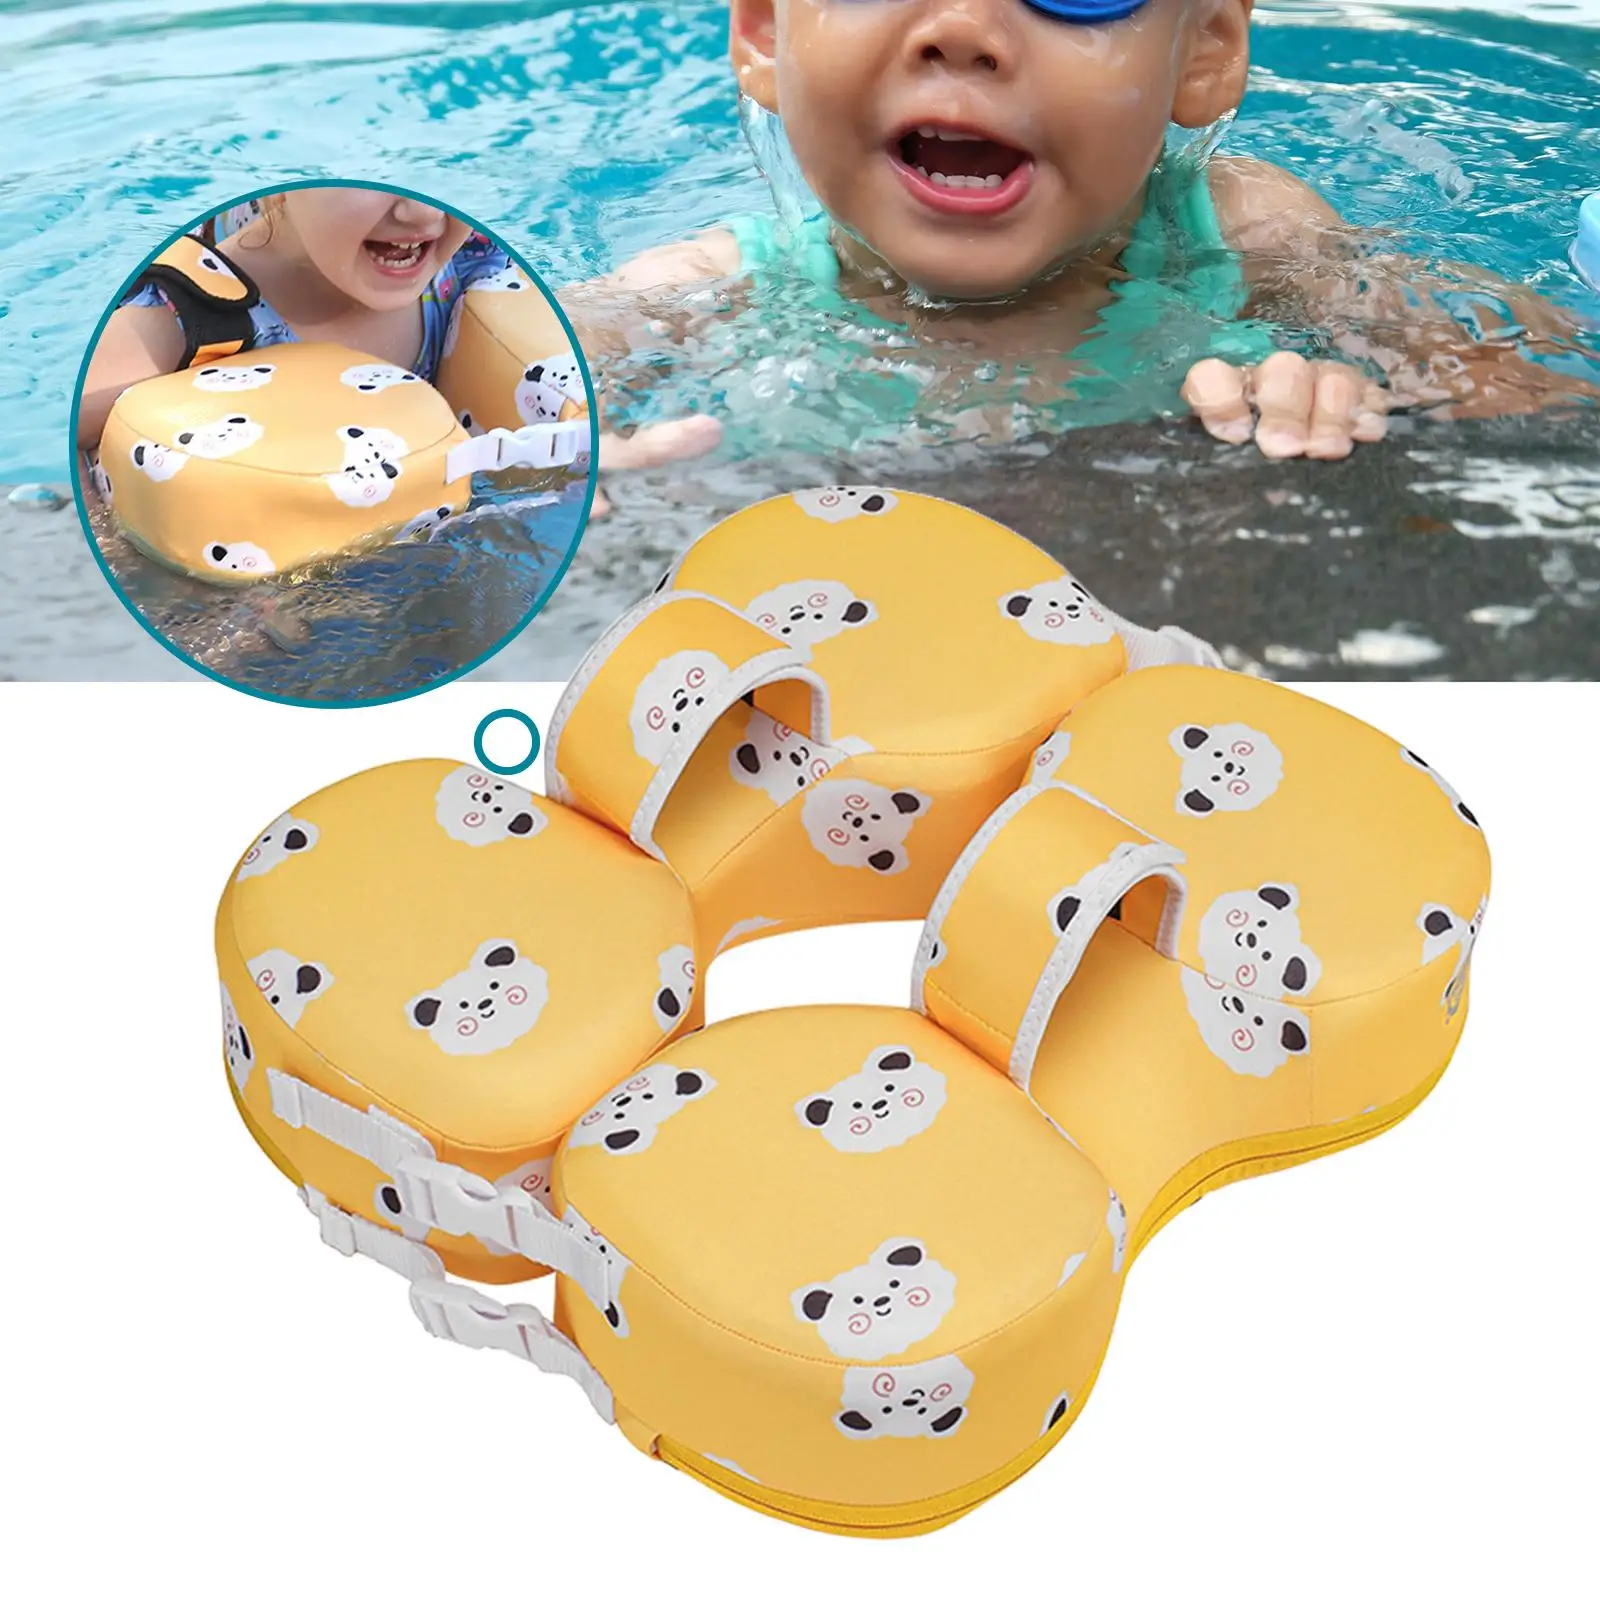 Baby Swimming Training Float Pool Floats Beach Toy Within 5 Years Old Water Floats Ring Aid for Kids Newborn Toddlers Baby